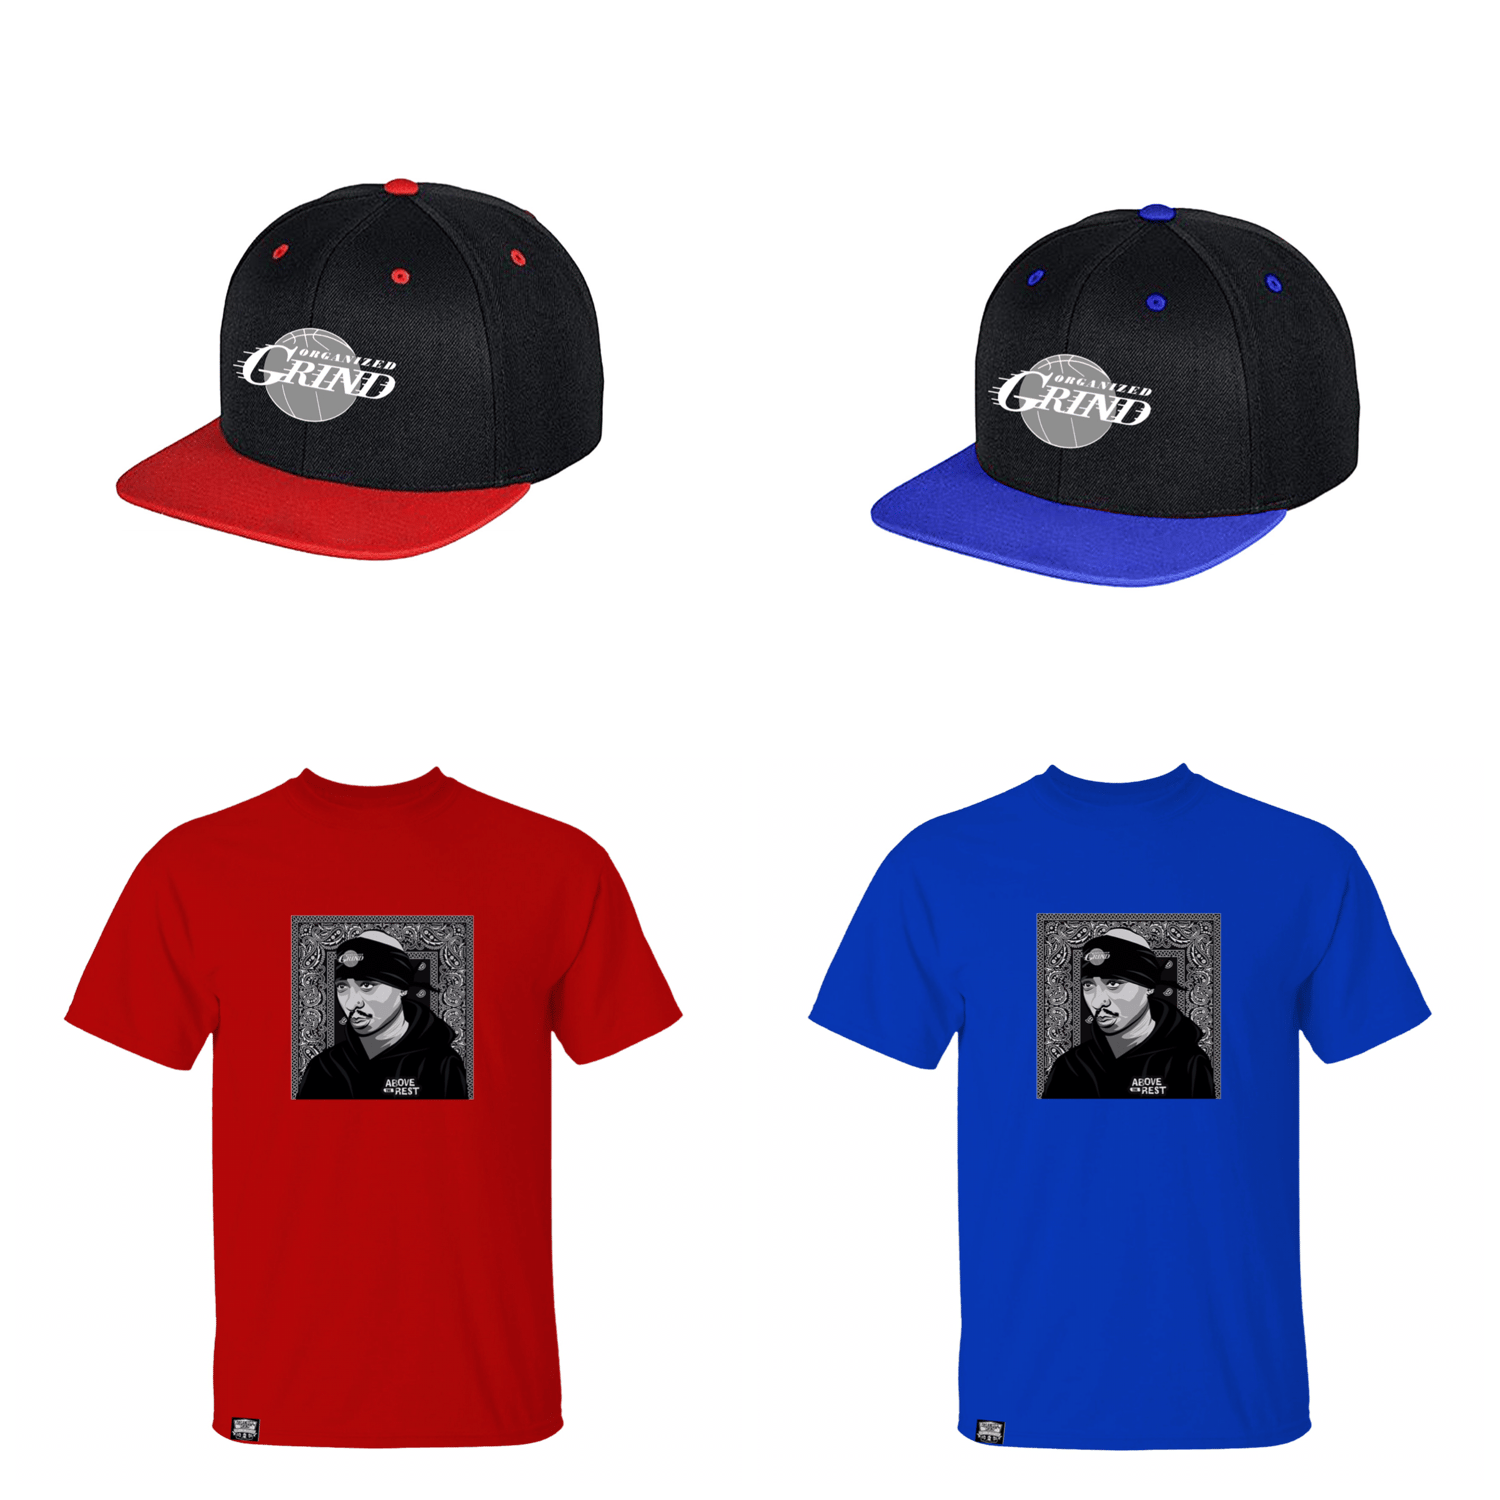 Image of 2Pac “Above the rest” T Shirts & Snapbacks 